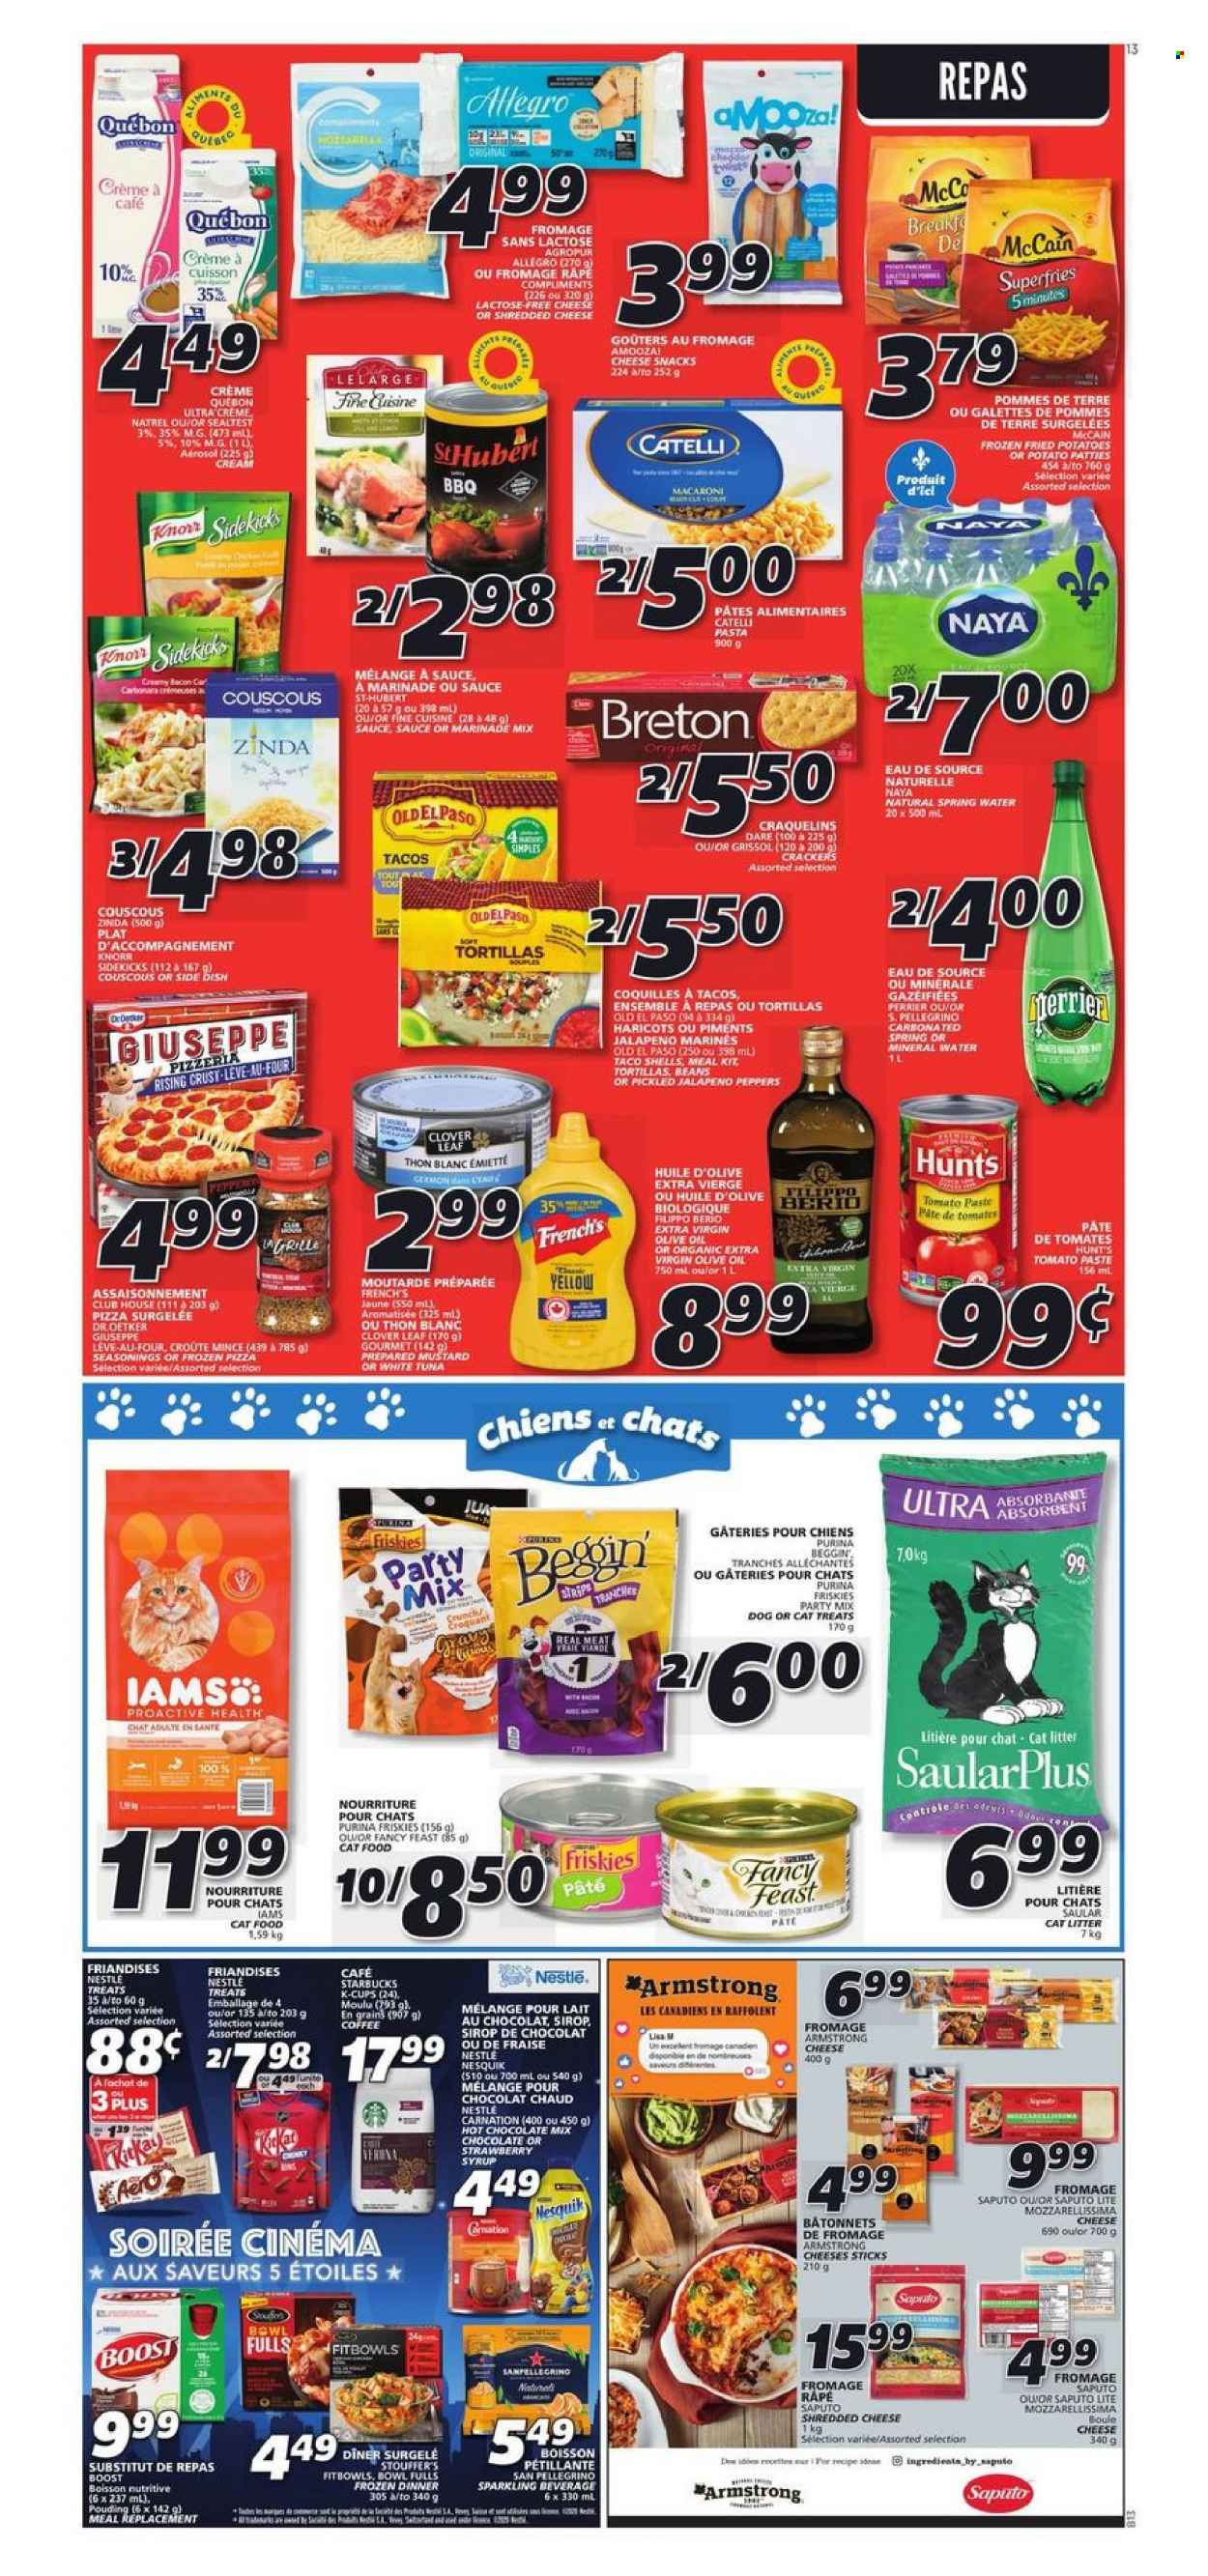 thumbnail - IGA Flyer - January 13, 2022 - January 19, 2022 - Sales products - tortillas, Old El Paso, tacos, Ace, potatoes, jalapeño, pizza, macaroni, pasta, bacon, shredded cheese, cheddar, Dr. Oetker, Clover, strips, Stouffer's, McCain, potato fries, snack, tomato paste, mustard, marinade, extra virgin olive oil, olive oil, syrup, Perrier, San Pellegrino, Boost, hot chocolate, coffee, coffee capsules, Starbucks, K-Cups, Knorr, Nesquik, Nestlé, couscous. Page 10.